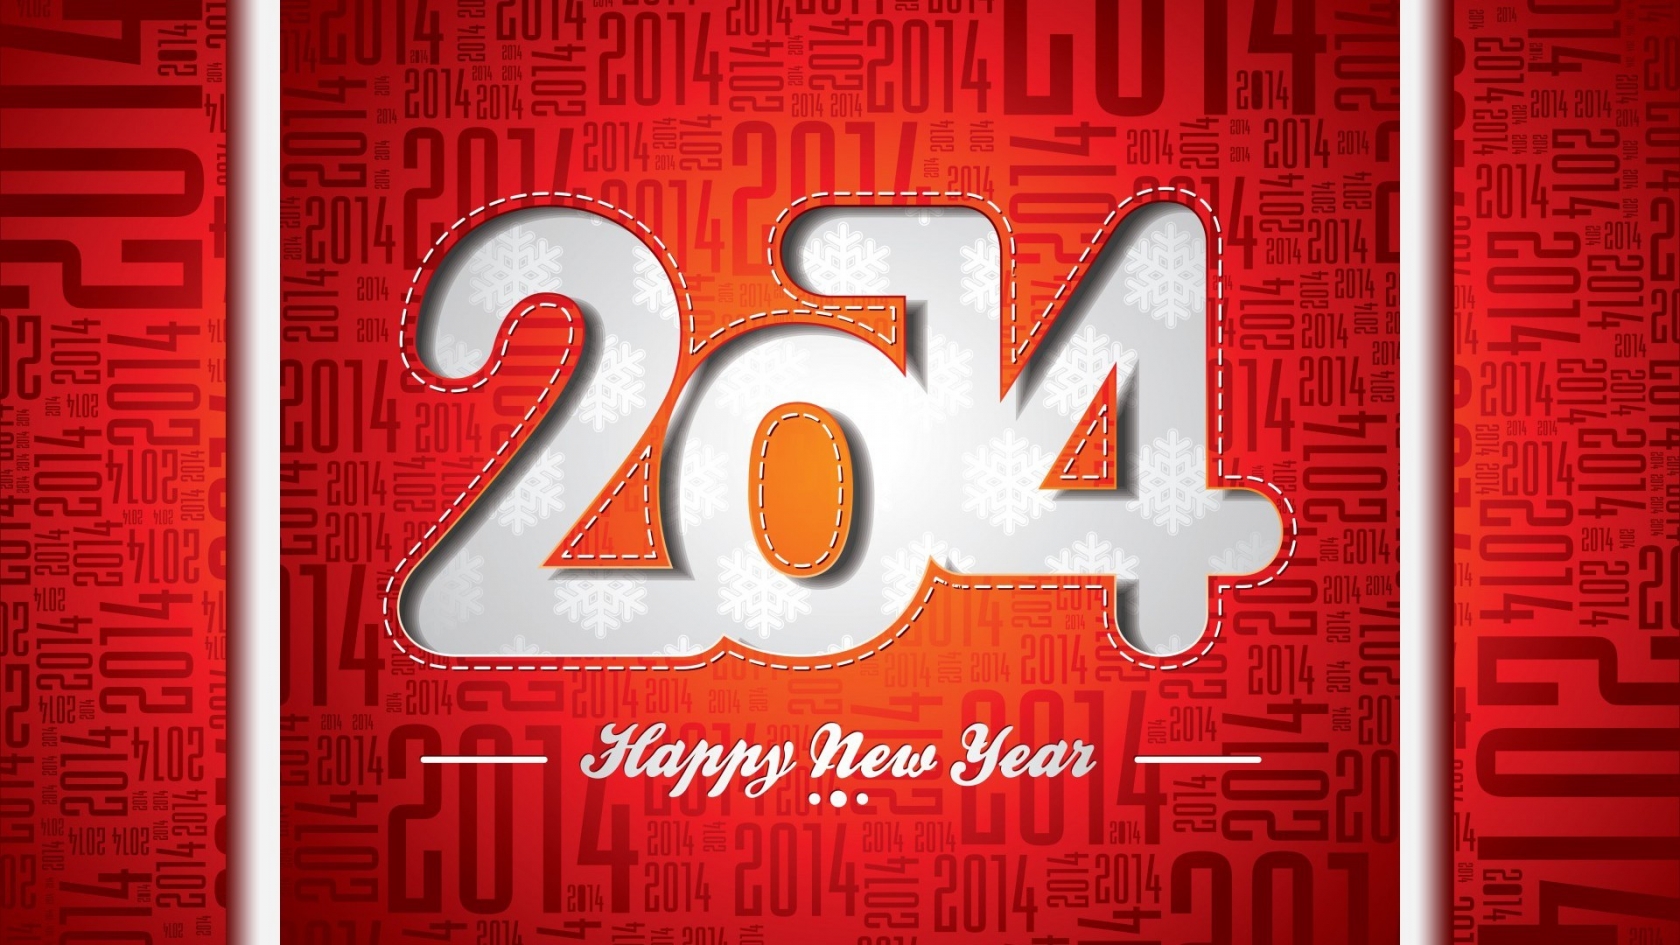 Happy New Year 2014 for 1680 x 945 HDTV resolution